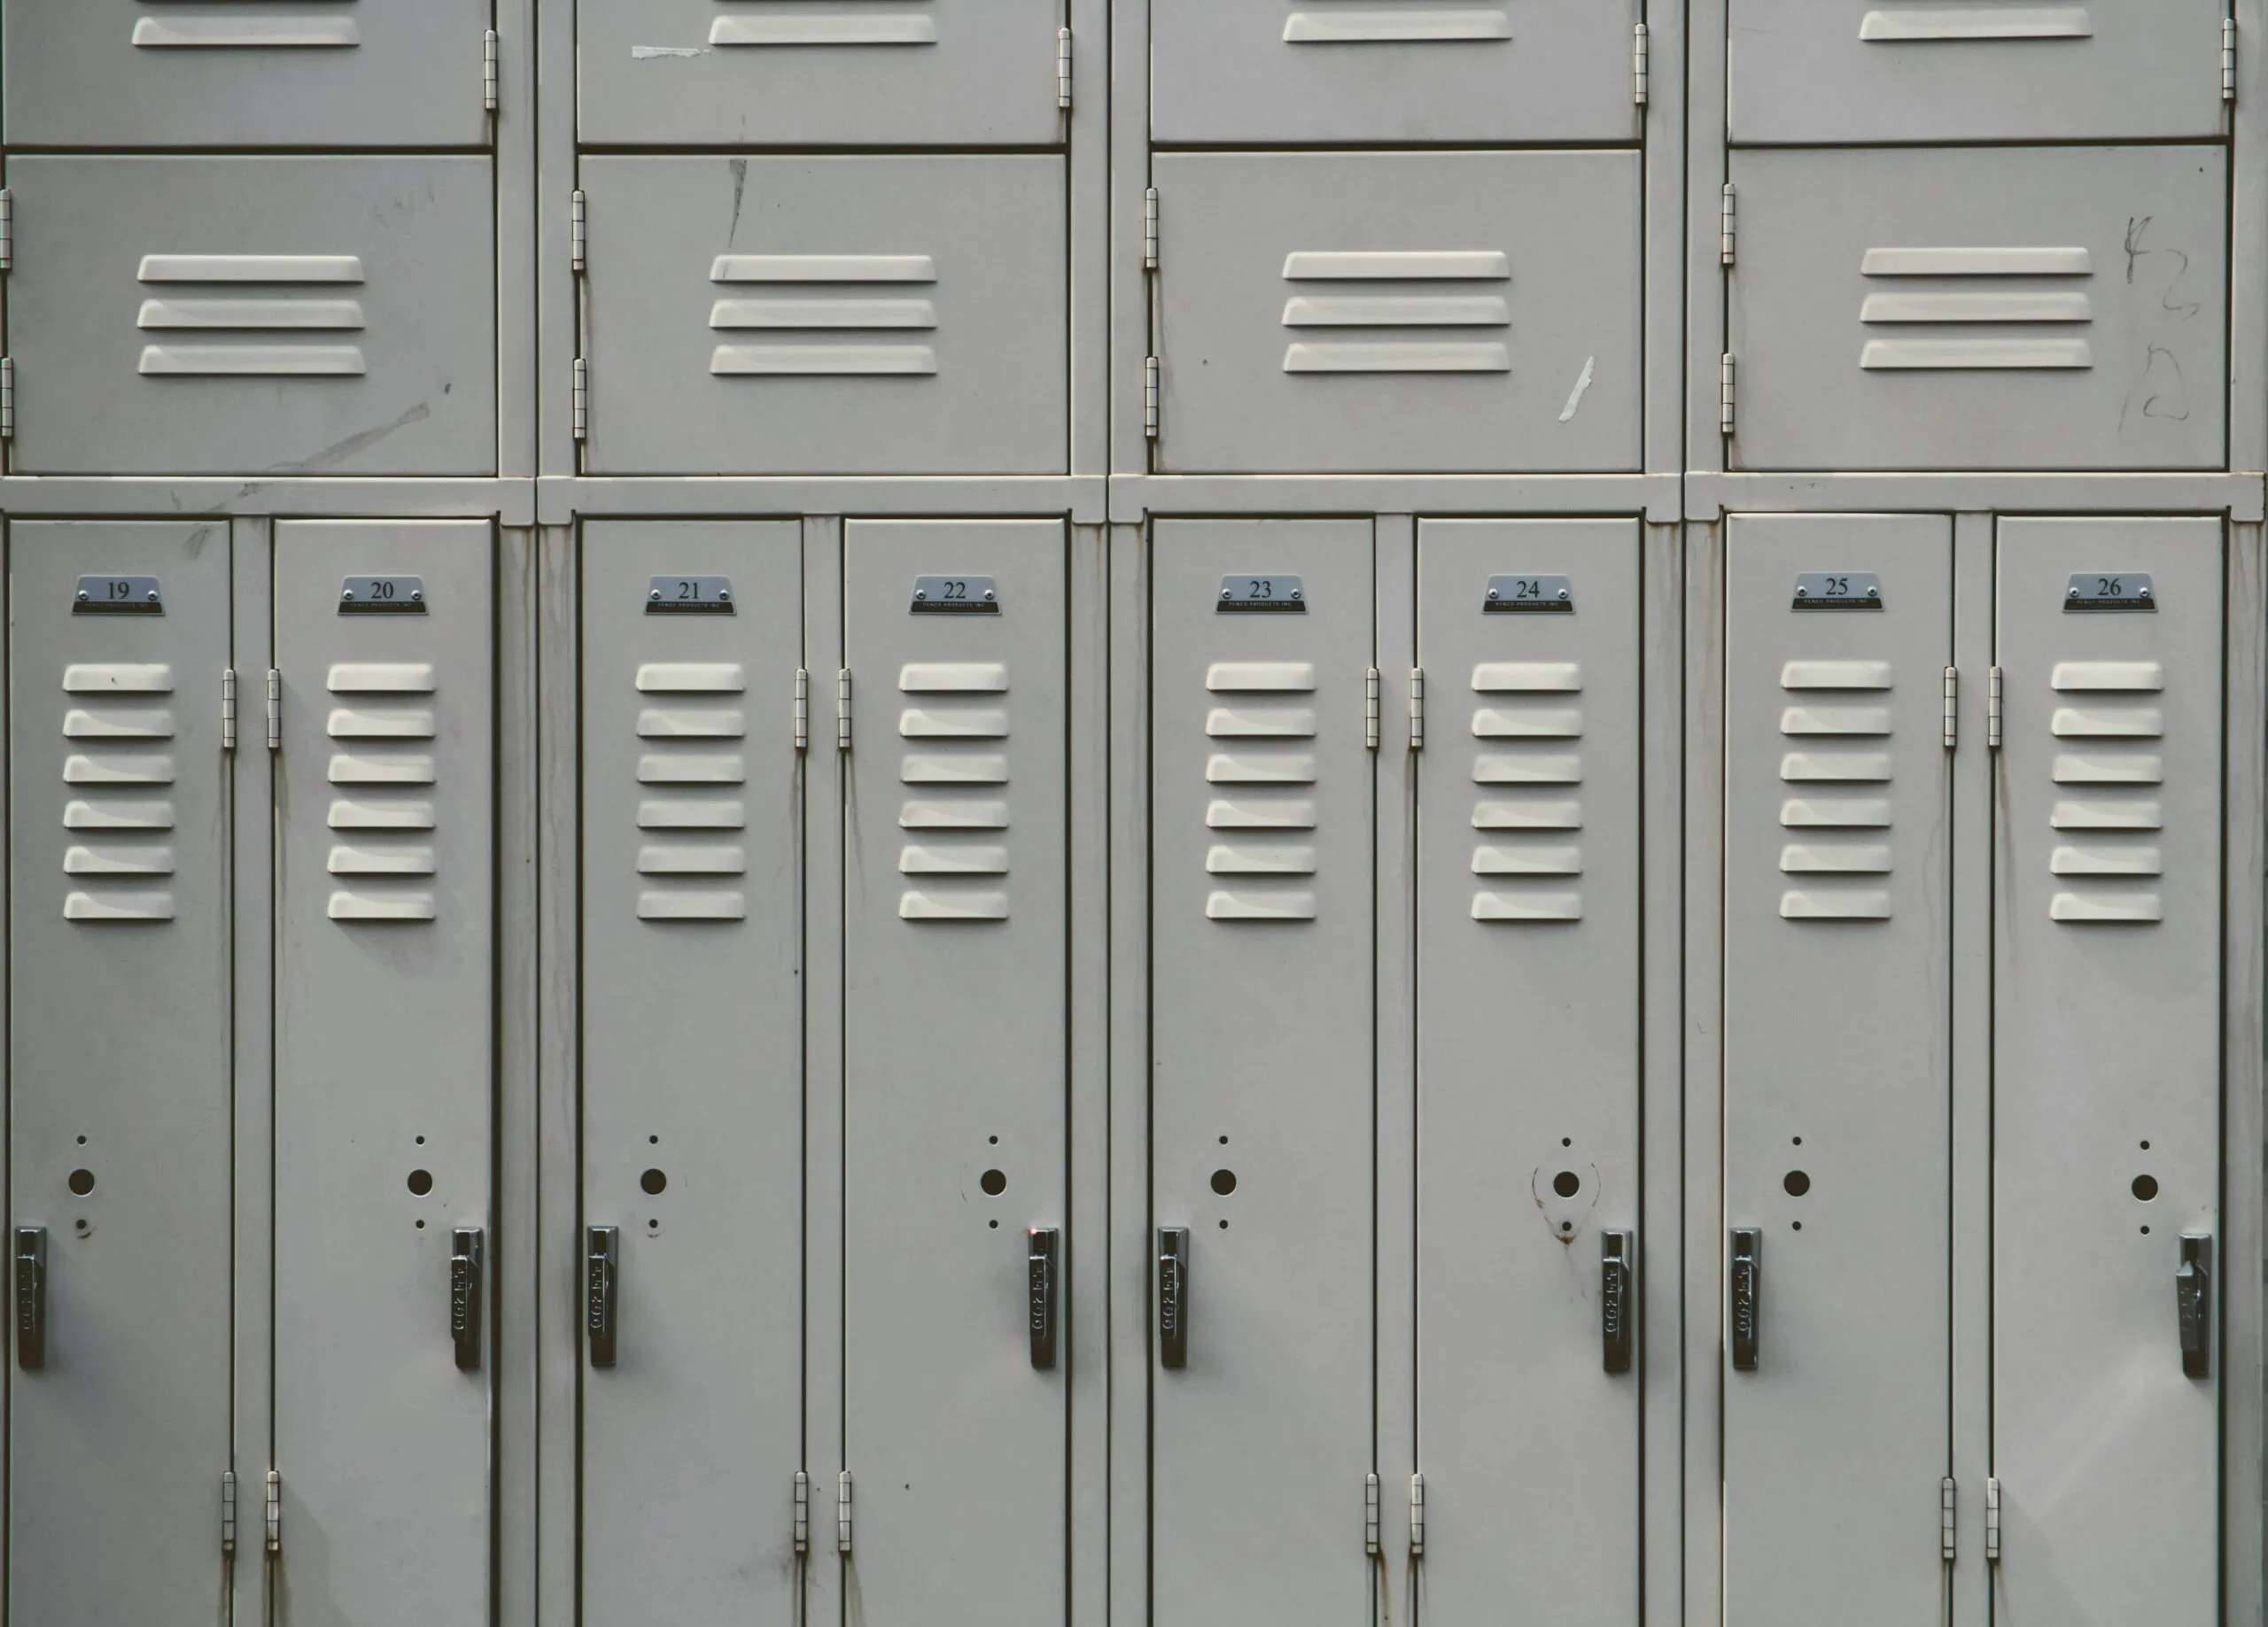 Lockers of a school protected by environmental monitoring sensors